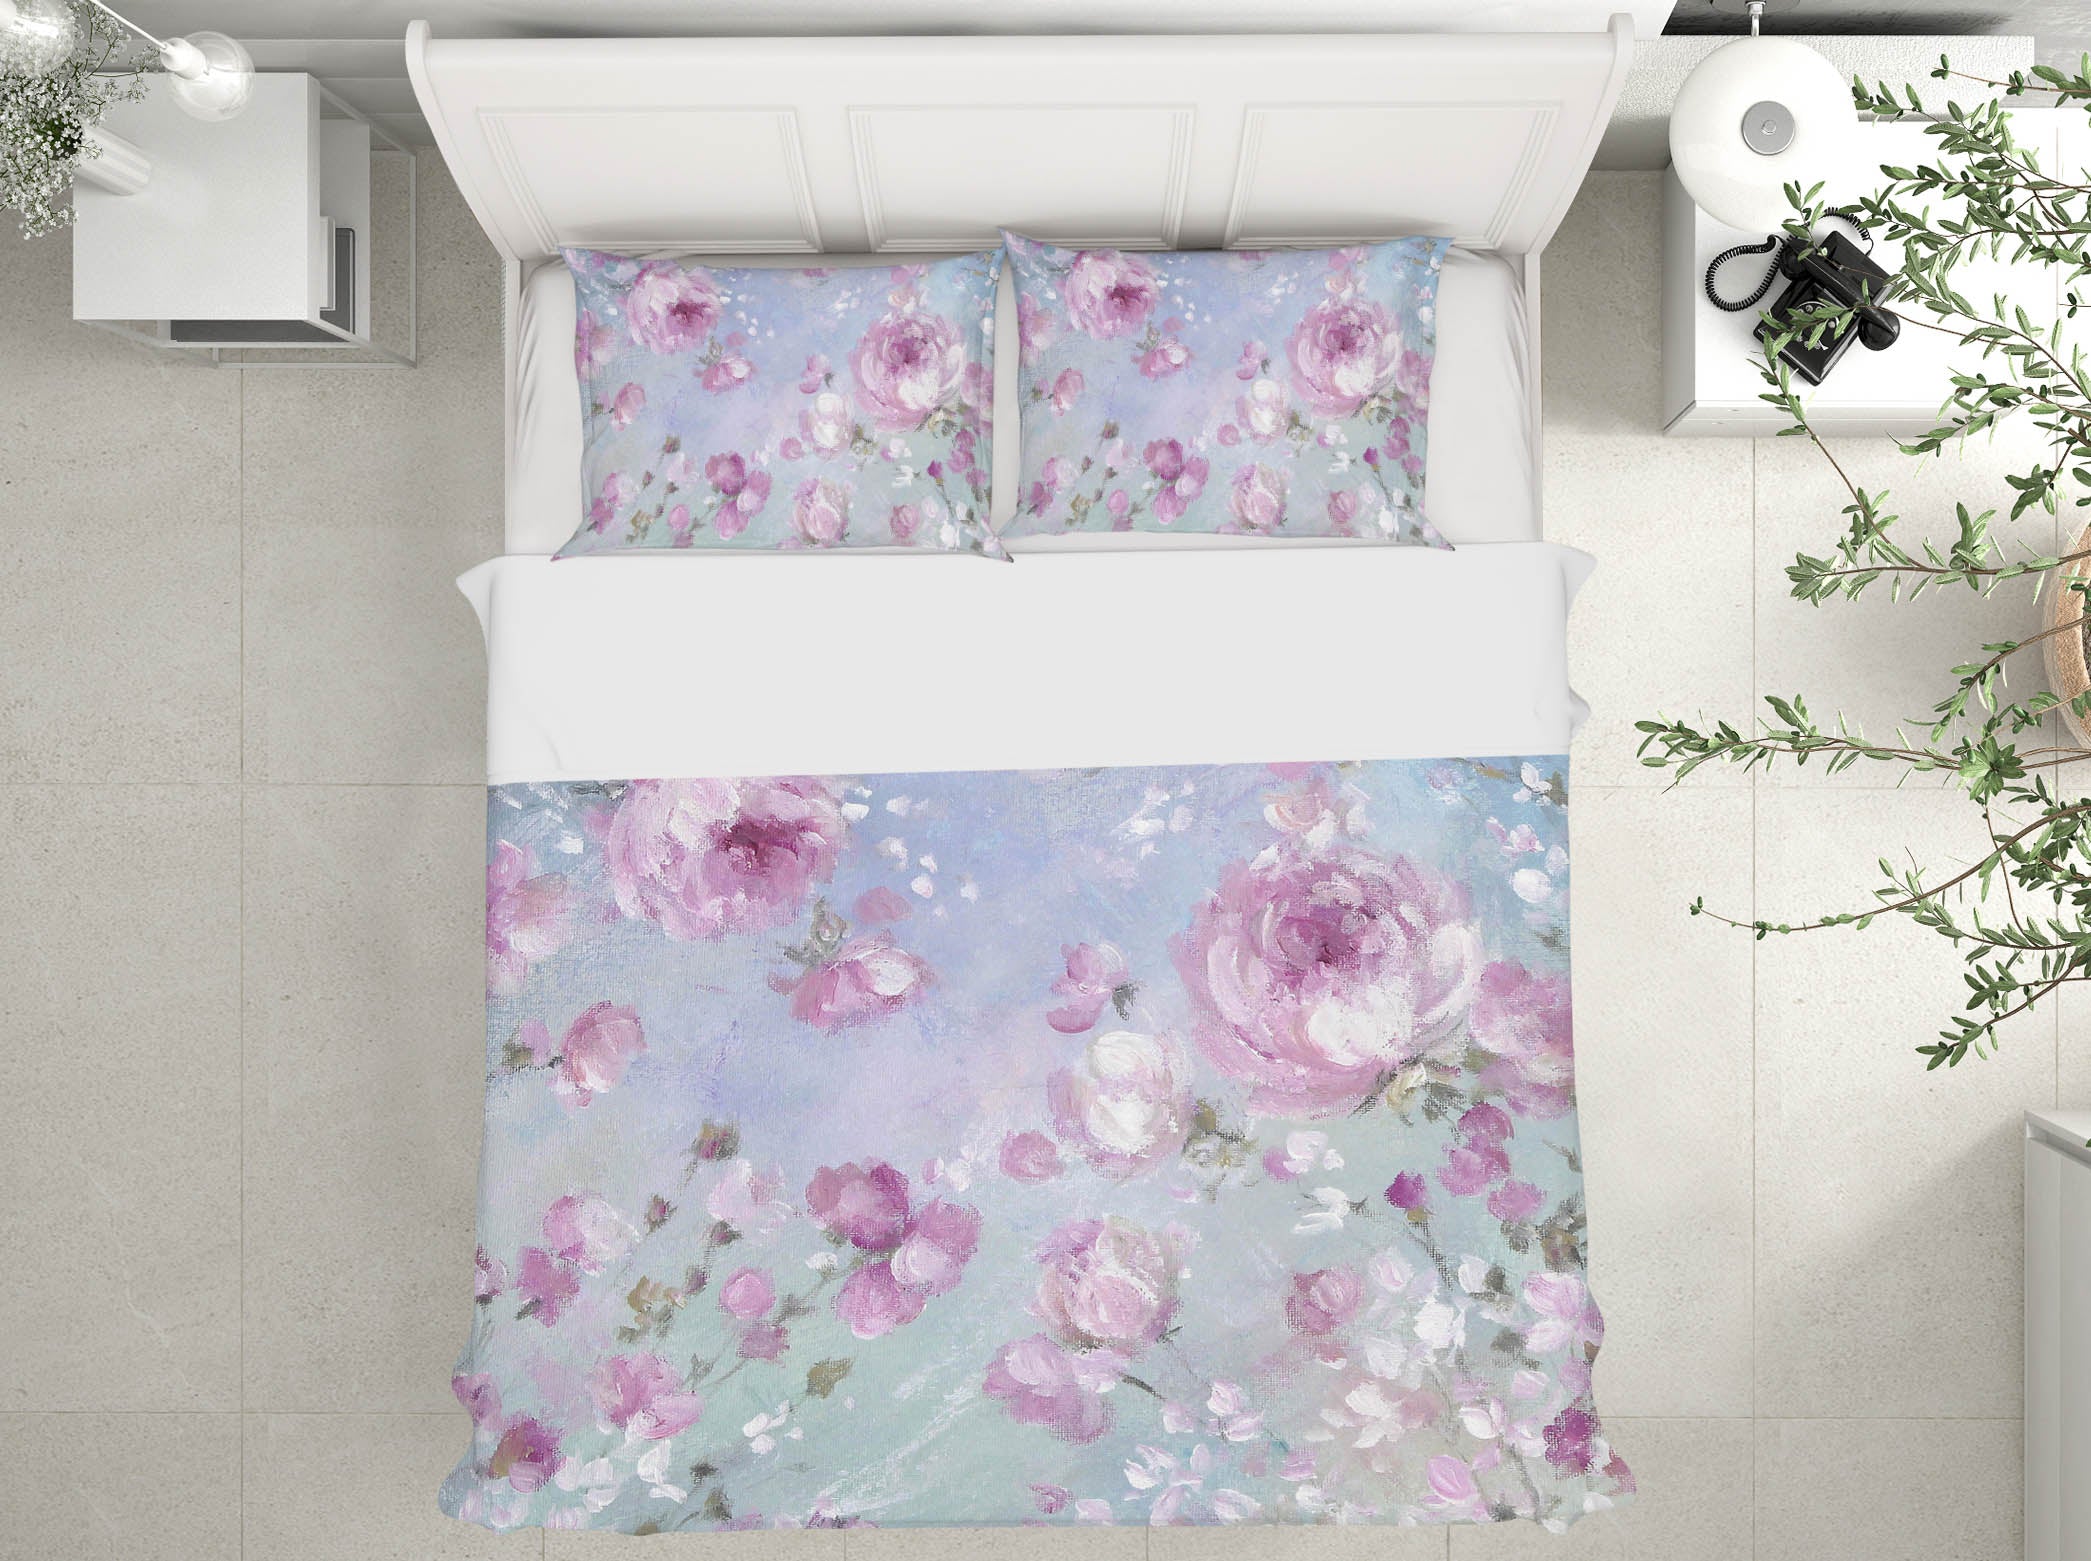 3D Blooming Roses 102 Debi Coules Bedding Bed Pillowcases Quilt